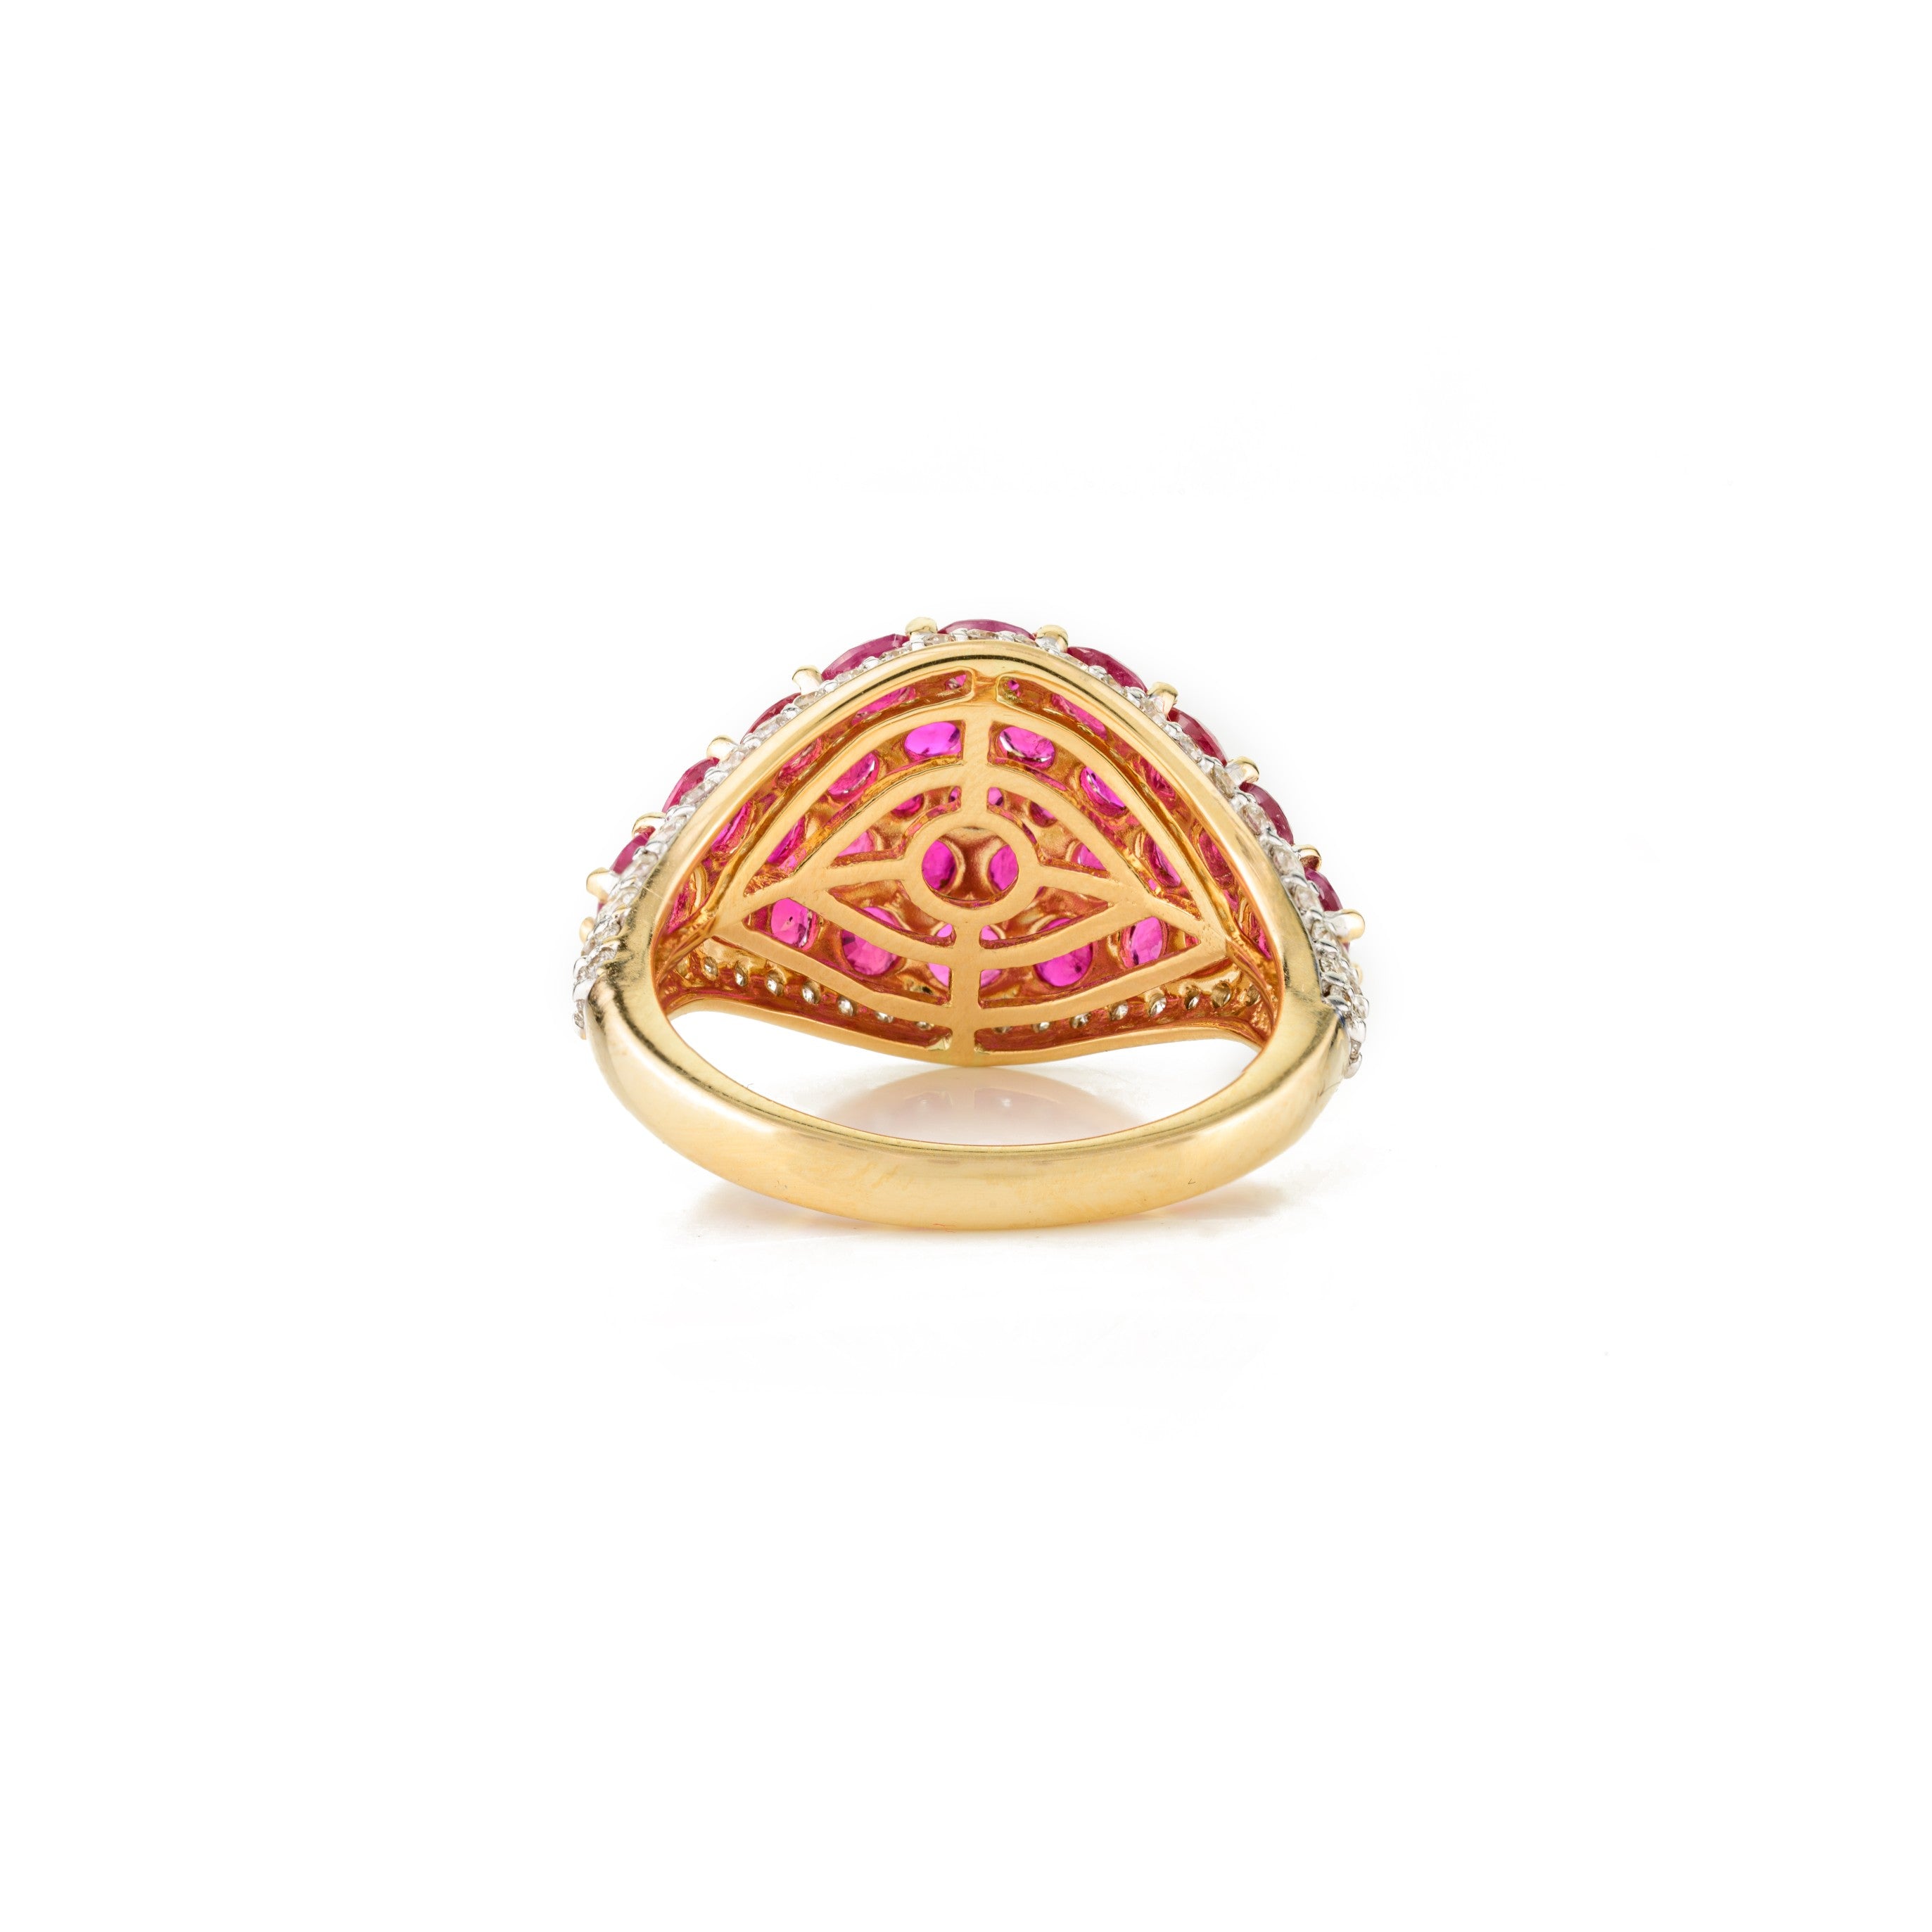 18K Solid Yellow Gold Ruby Cluster Ring